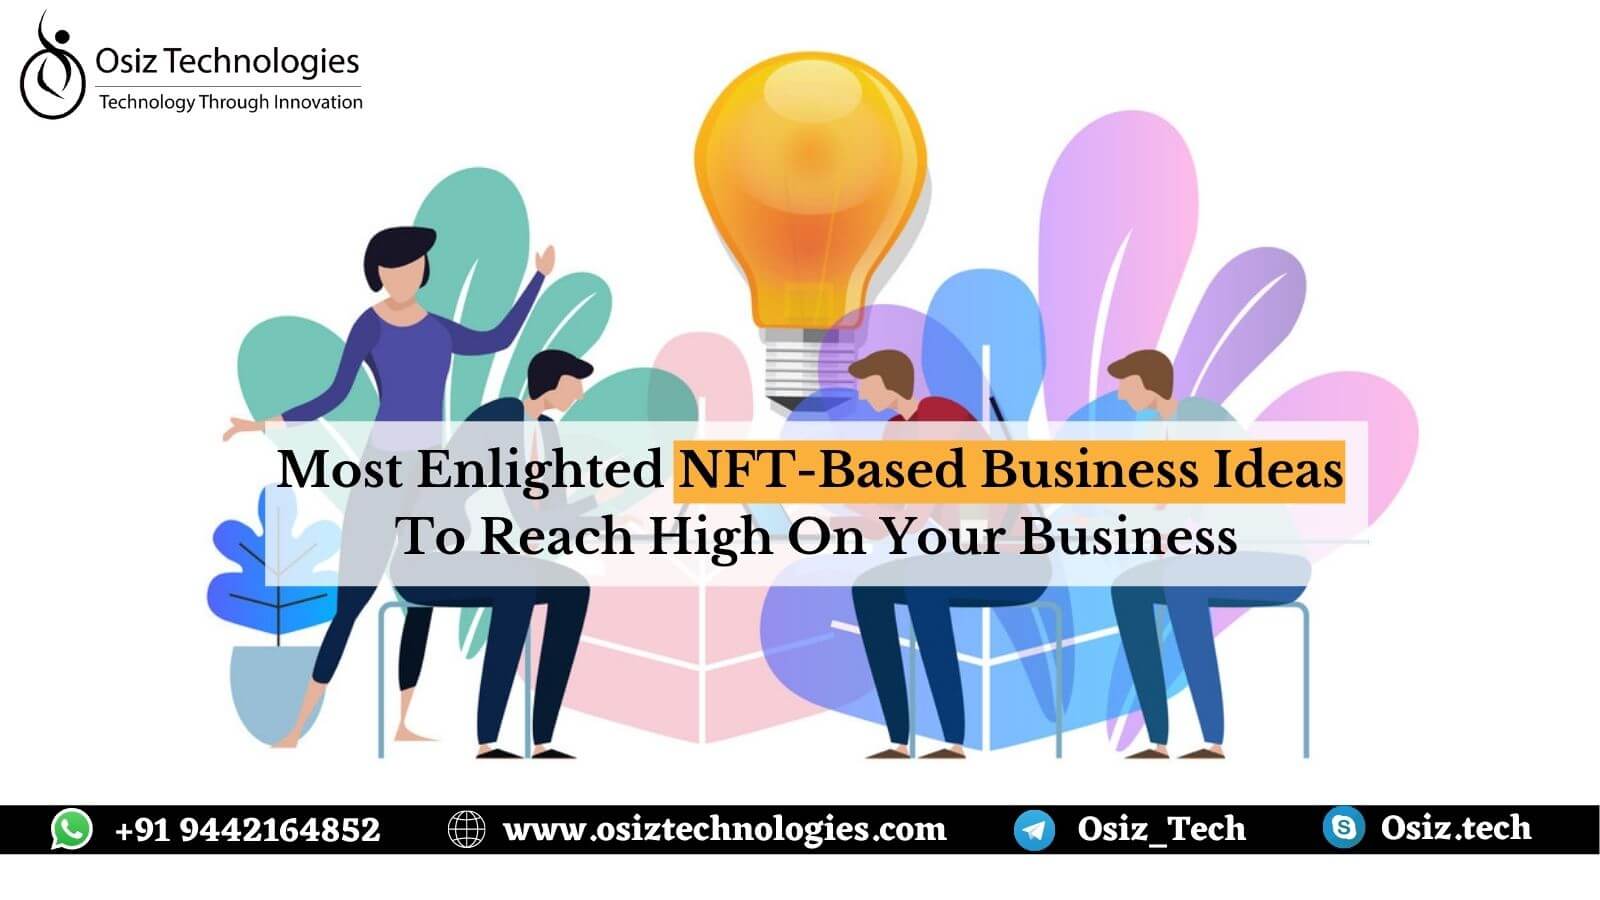 Most Enlighted NFT-Based Business Ideas In 2022 To Reach High On Your Business